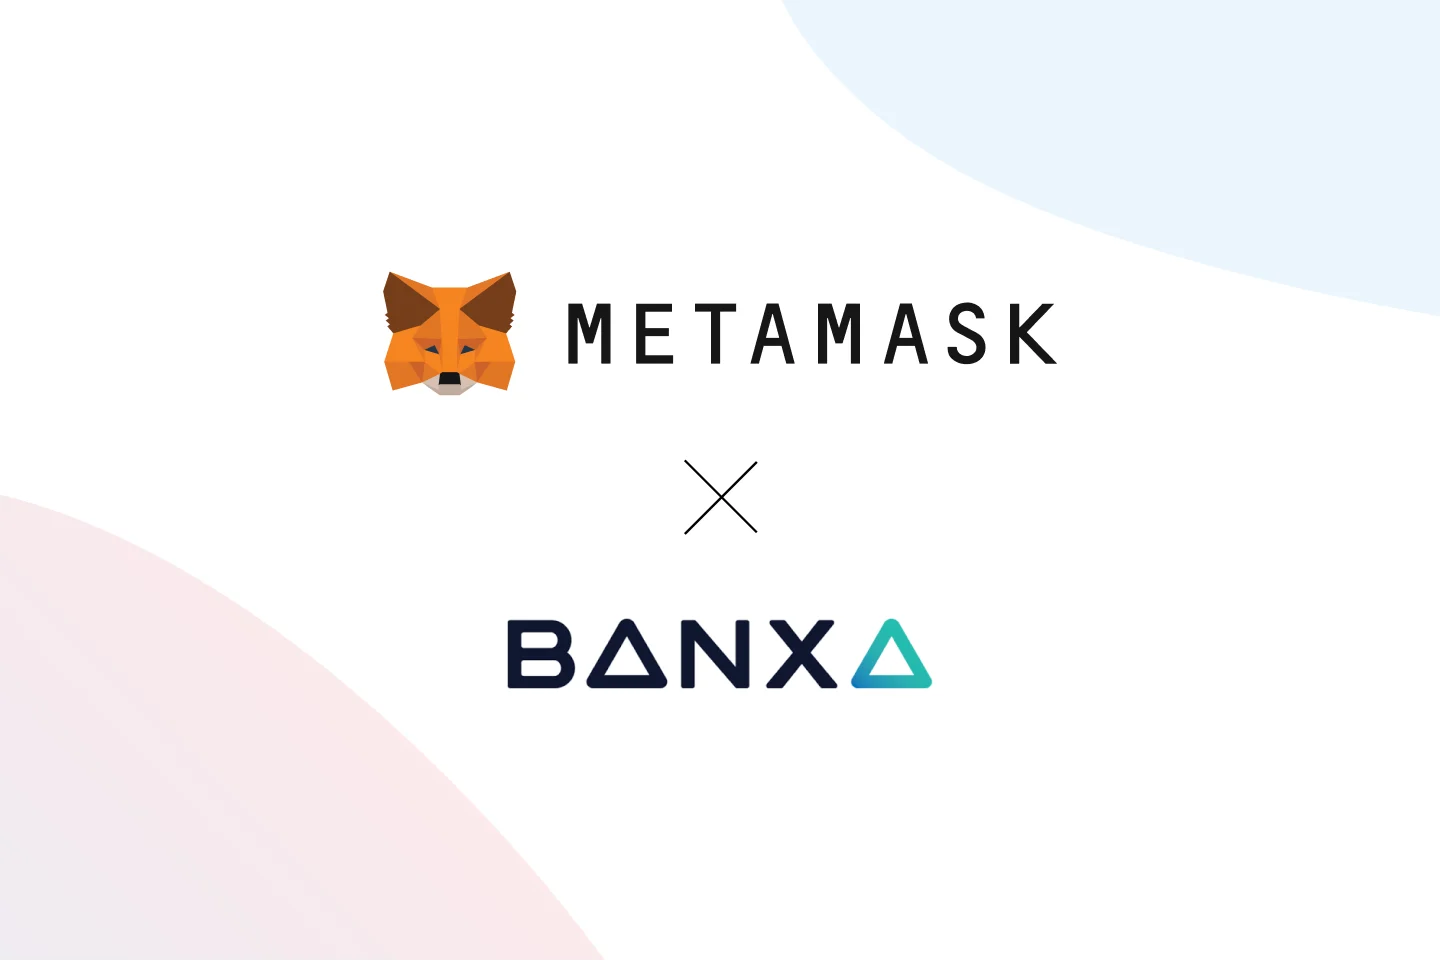 Banxa and MetaMask Partner to Make it Easier to Access Web3